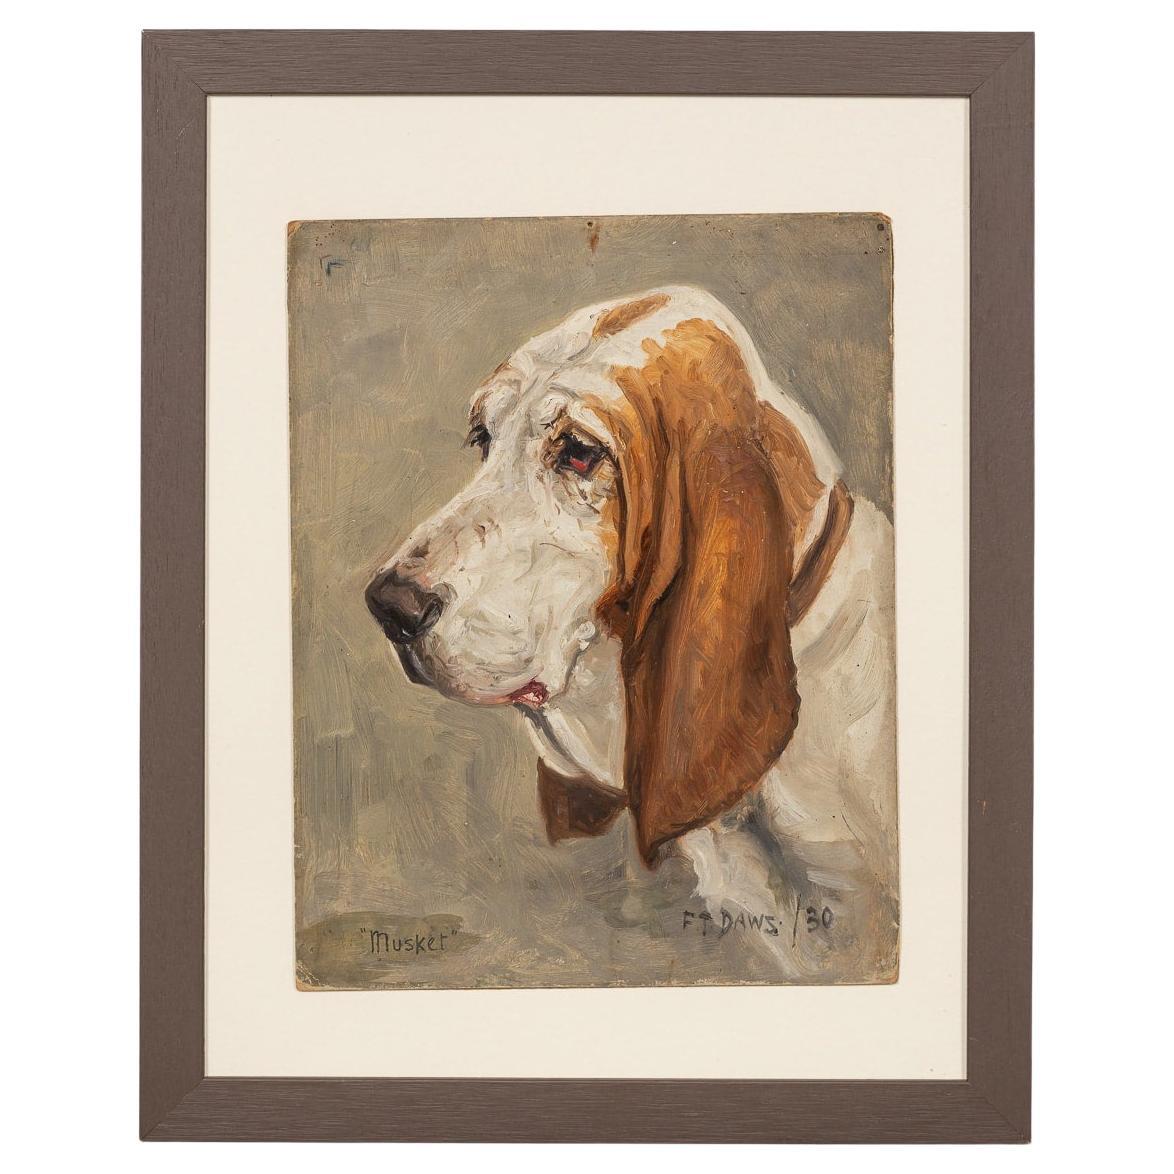 20th Century Framed Basset Hound Oil On Canvas By Frederick Thomas Daws c.1930 For Sale